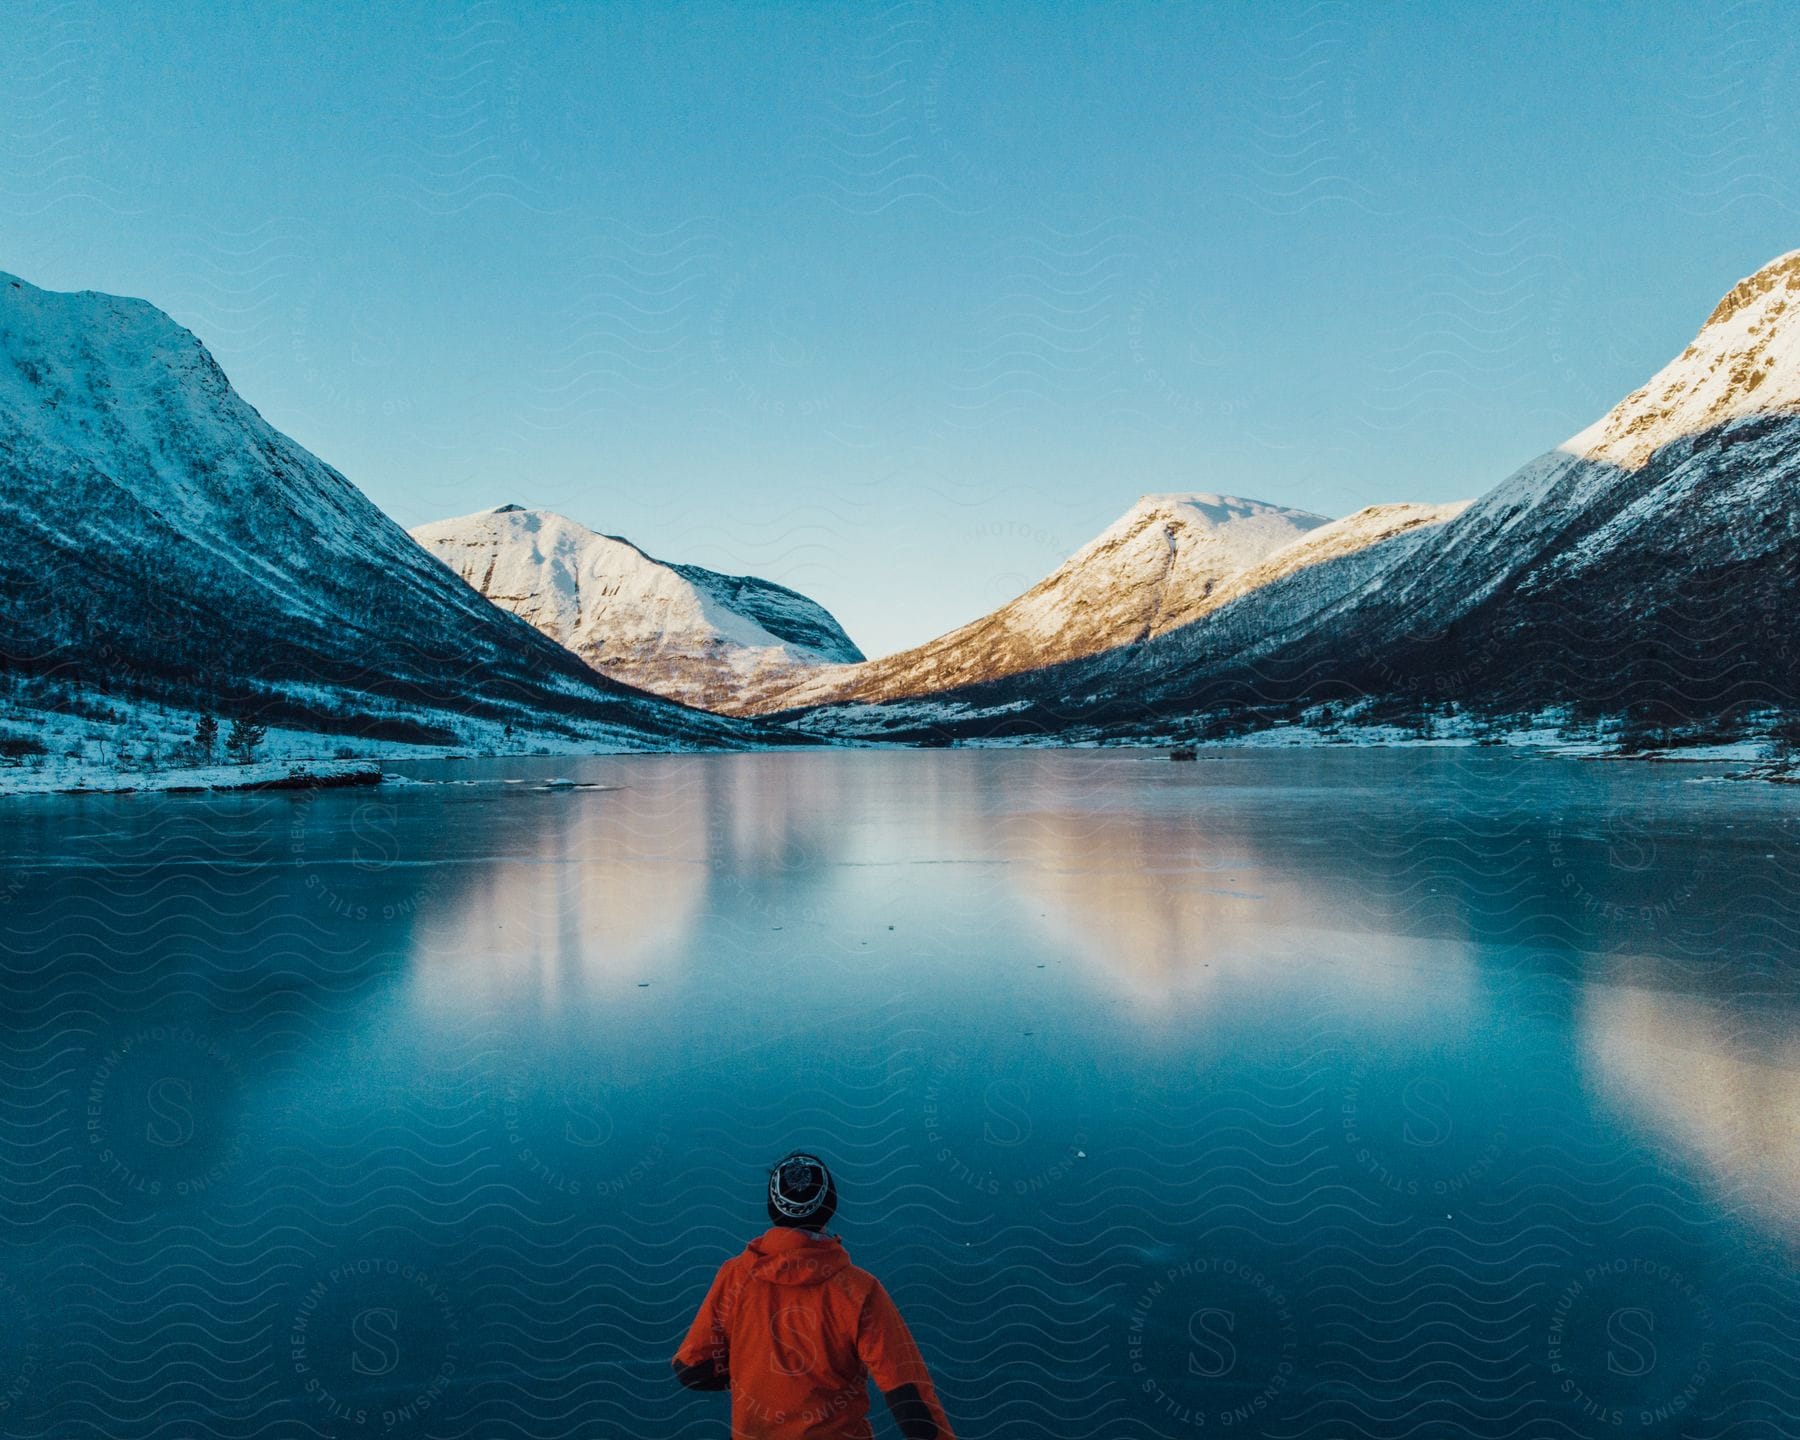 Mountains and a frozen lake in norway during winter